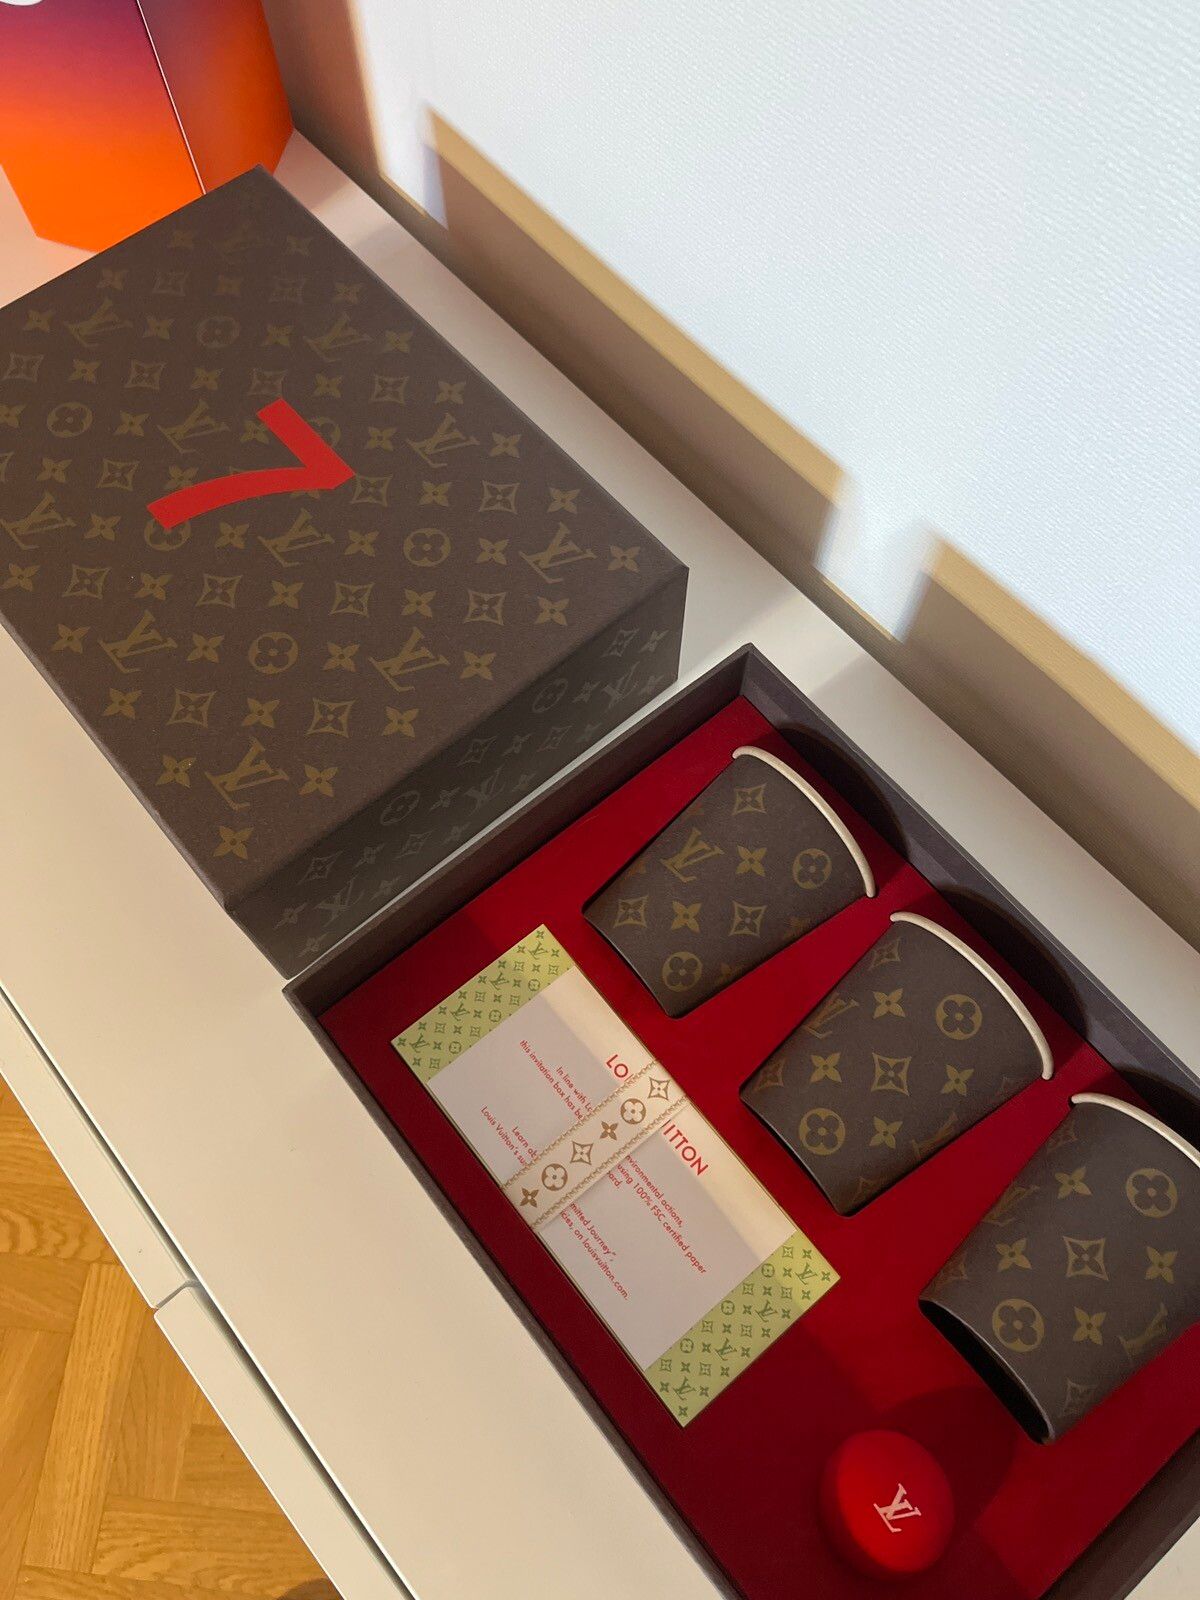 Louis Vuitton Virgil Abloh 2022 Invitation Shell Hide The Ball Beer Pong  Game